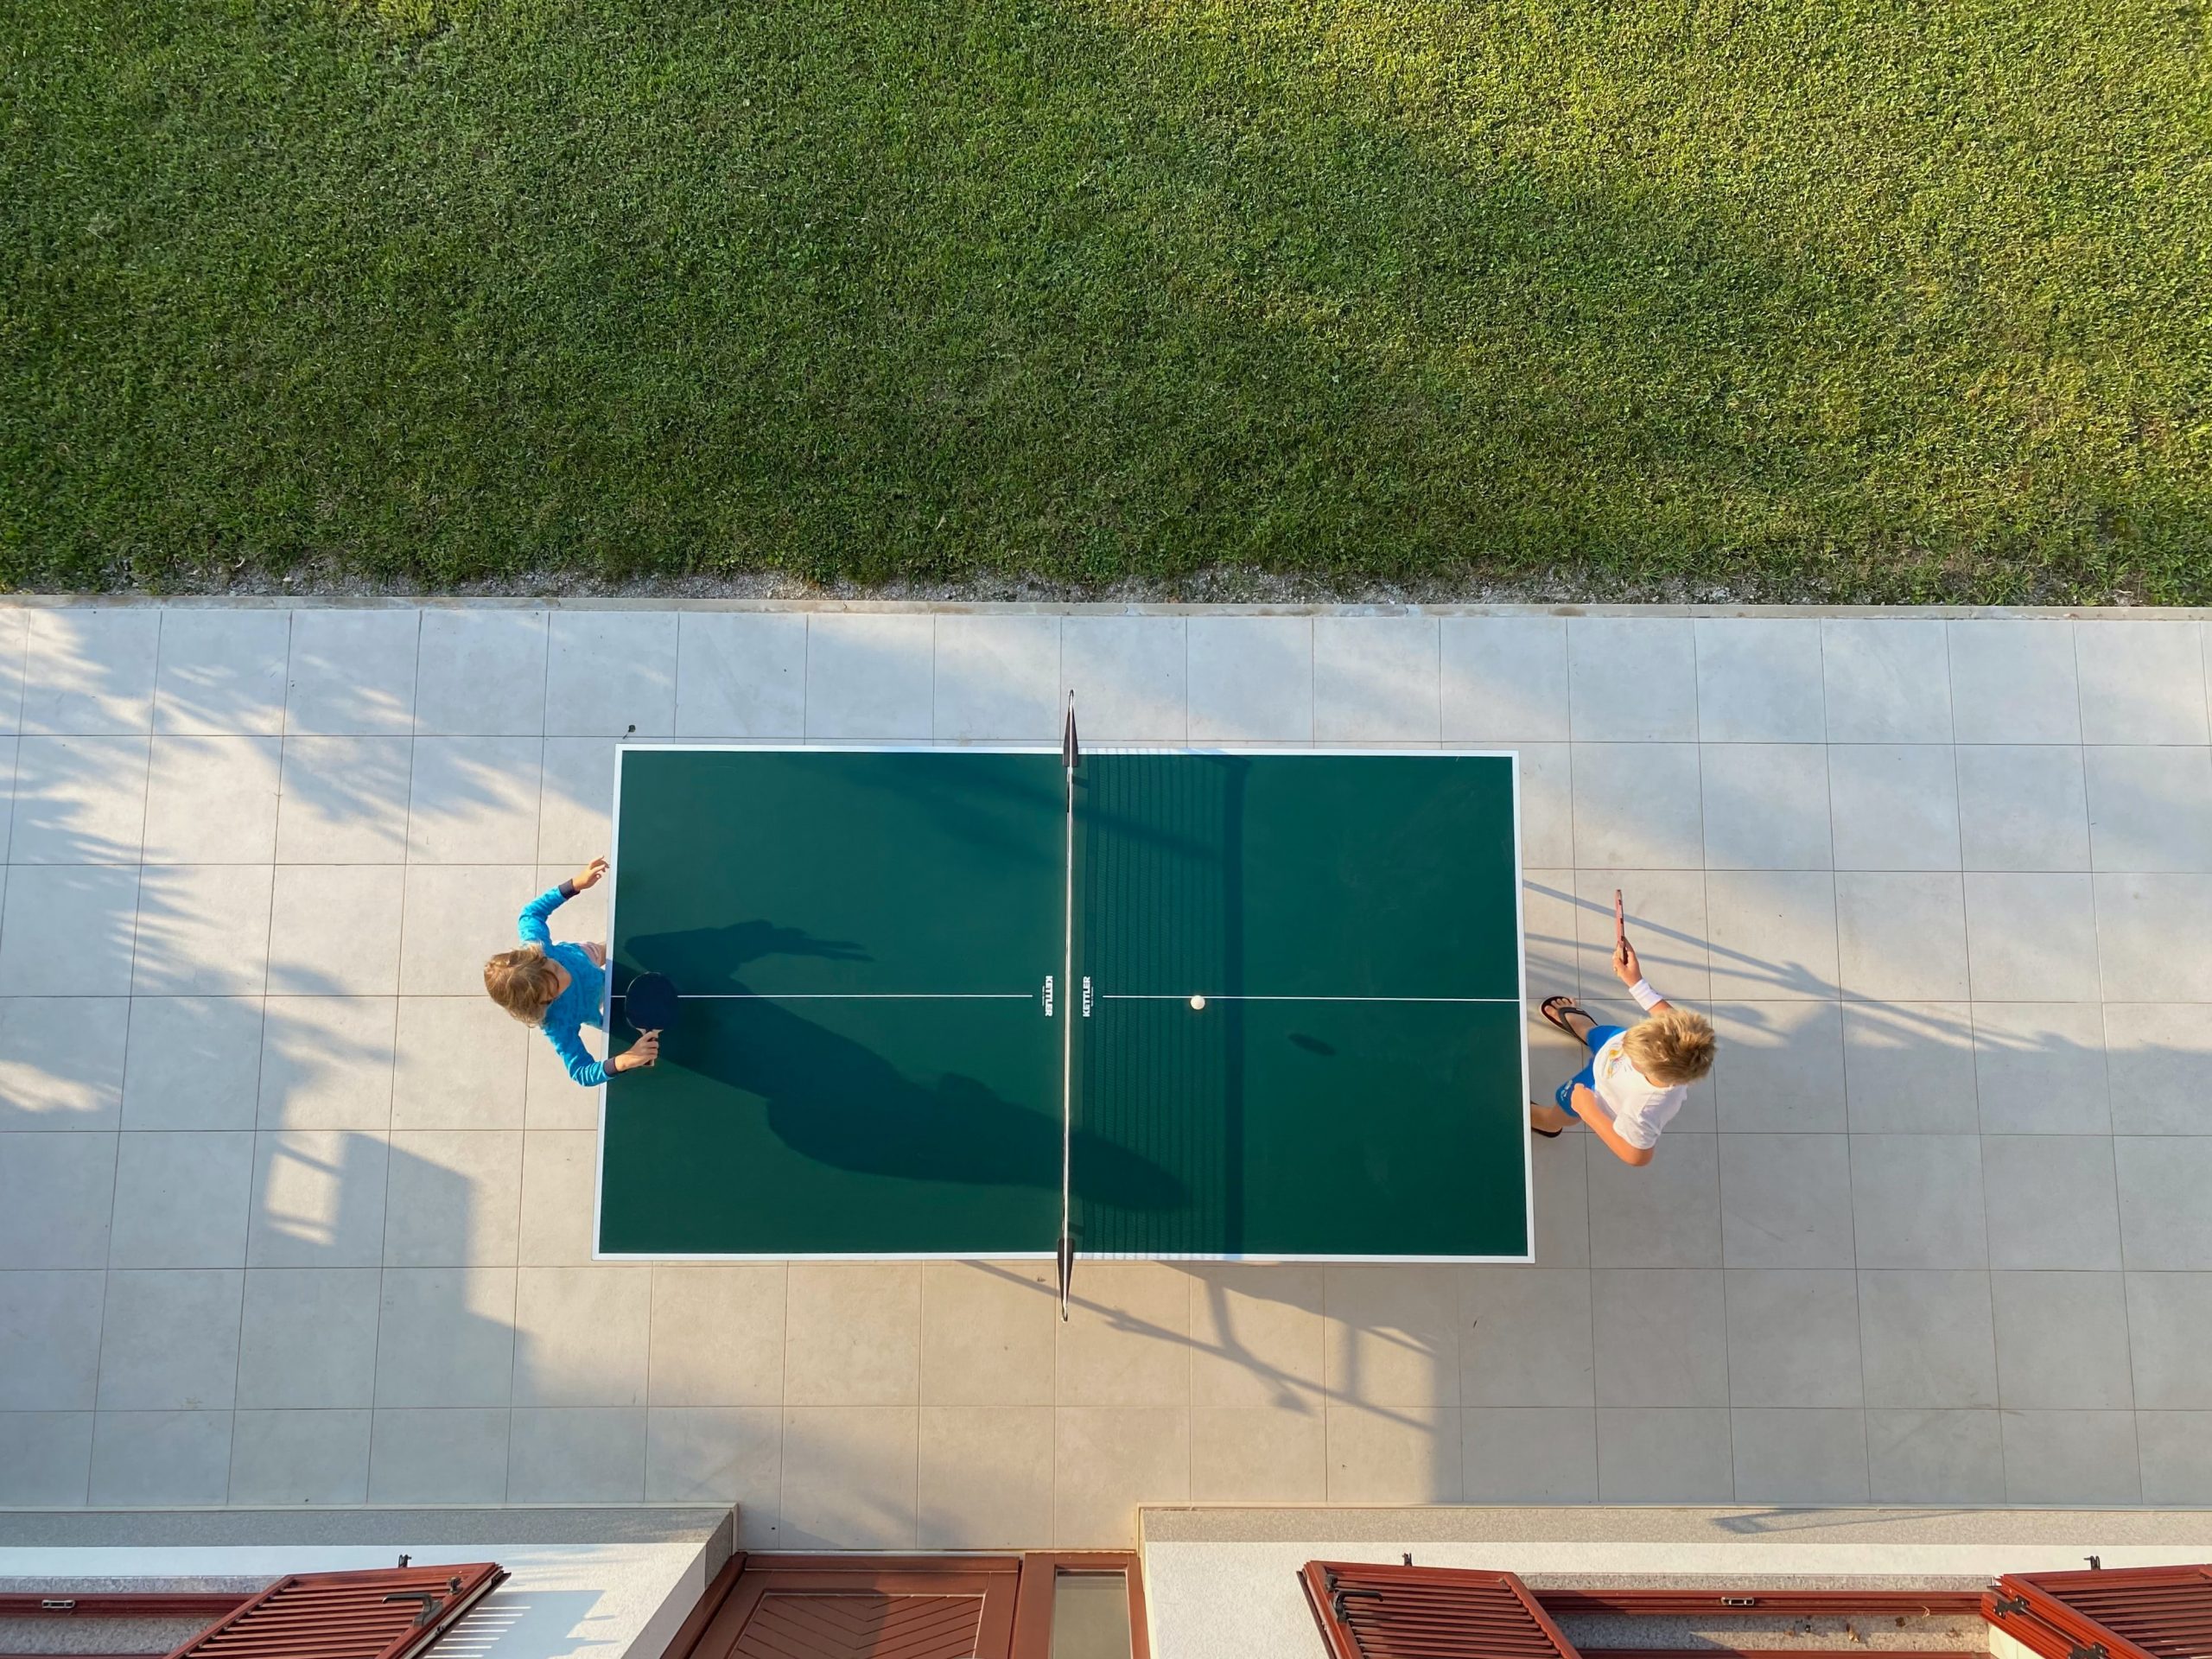 Table tennis table from above, with two players, on a sealed surface, with a building and a lawn.